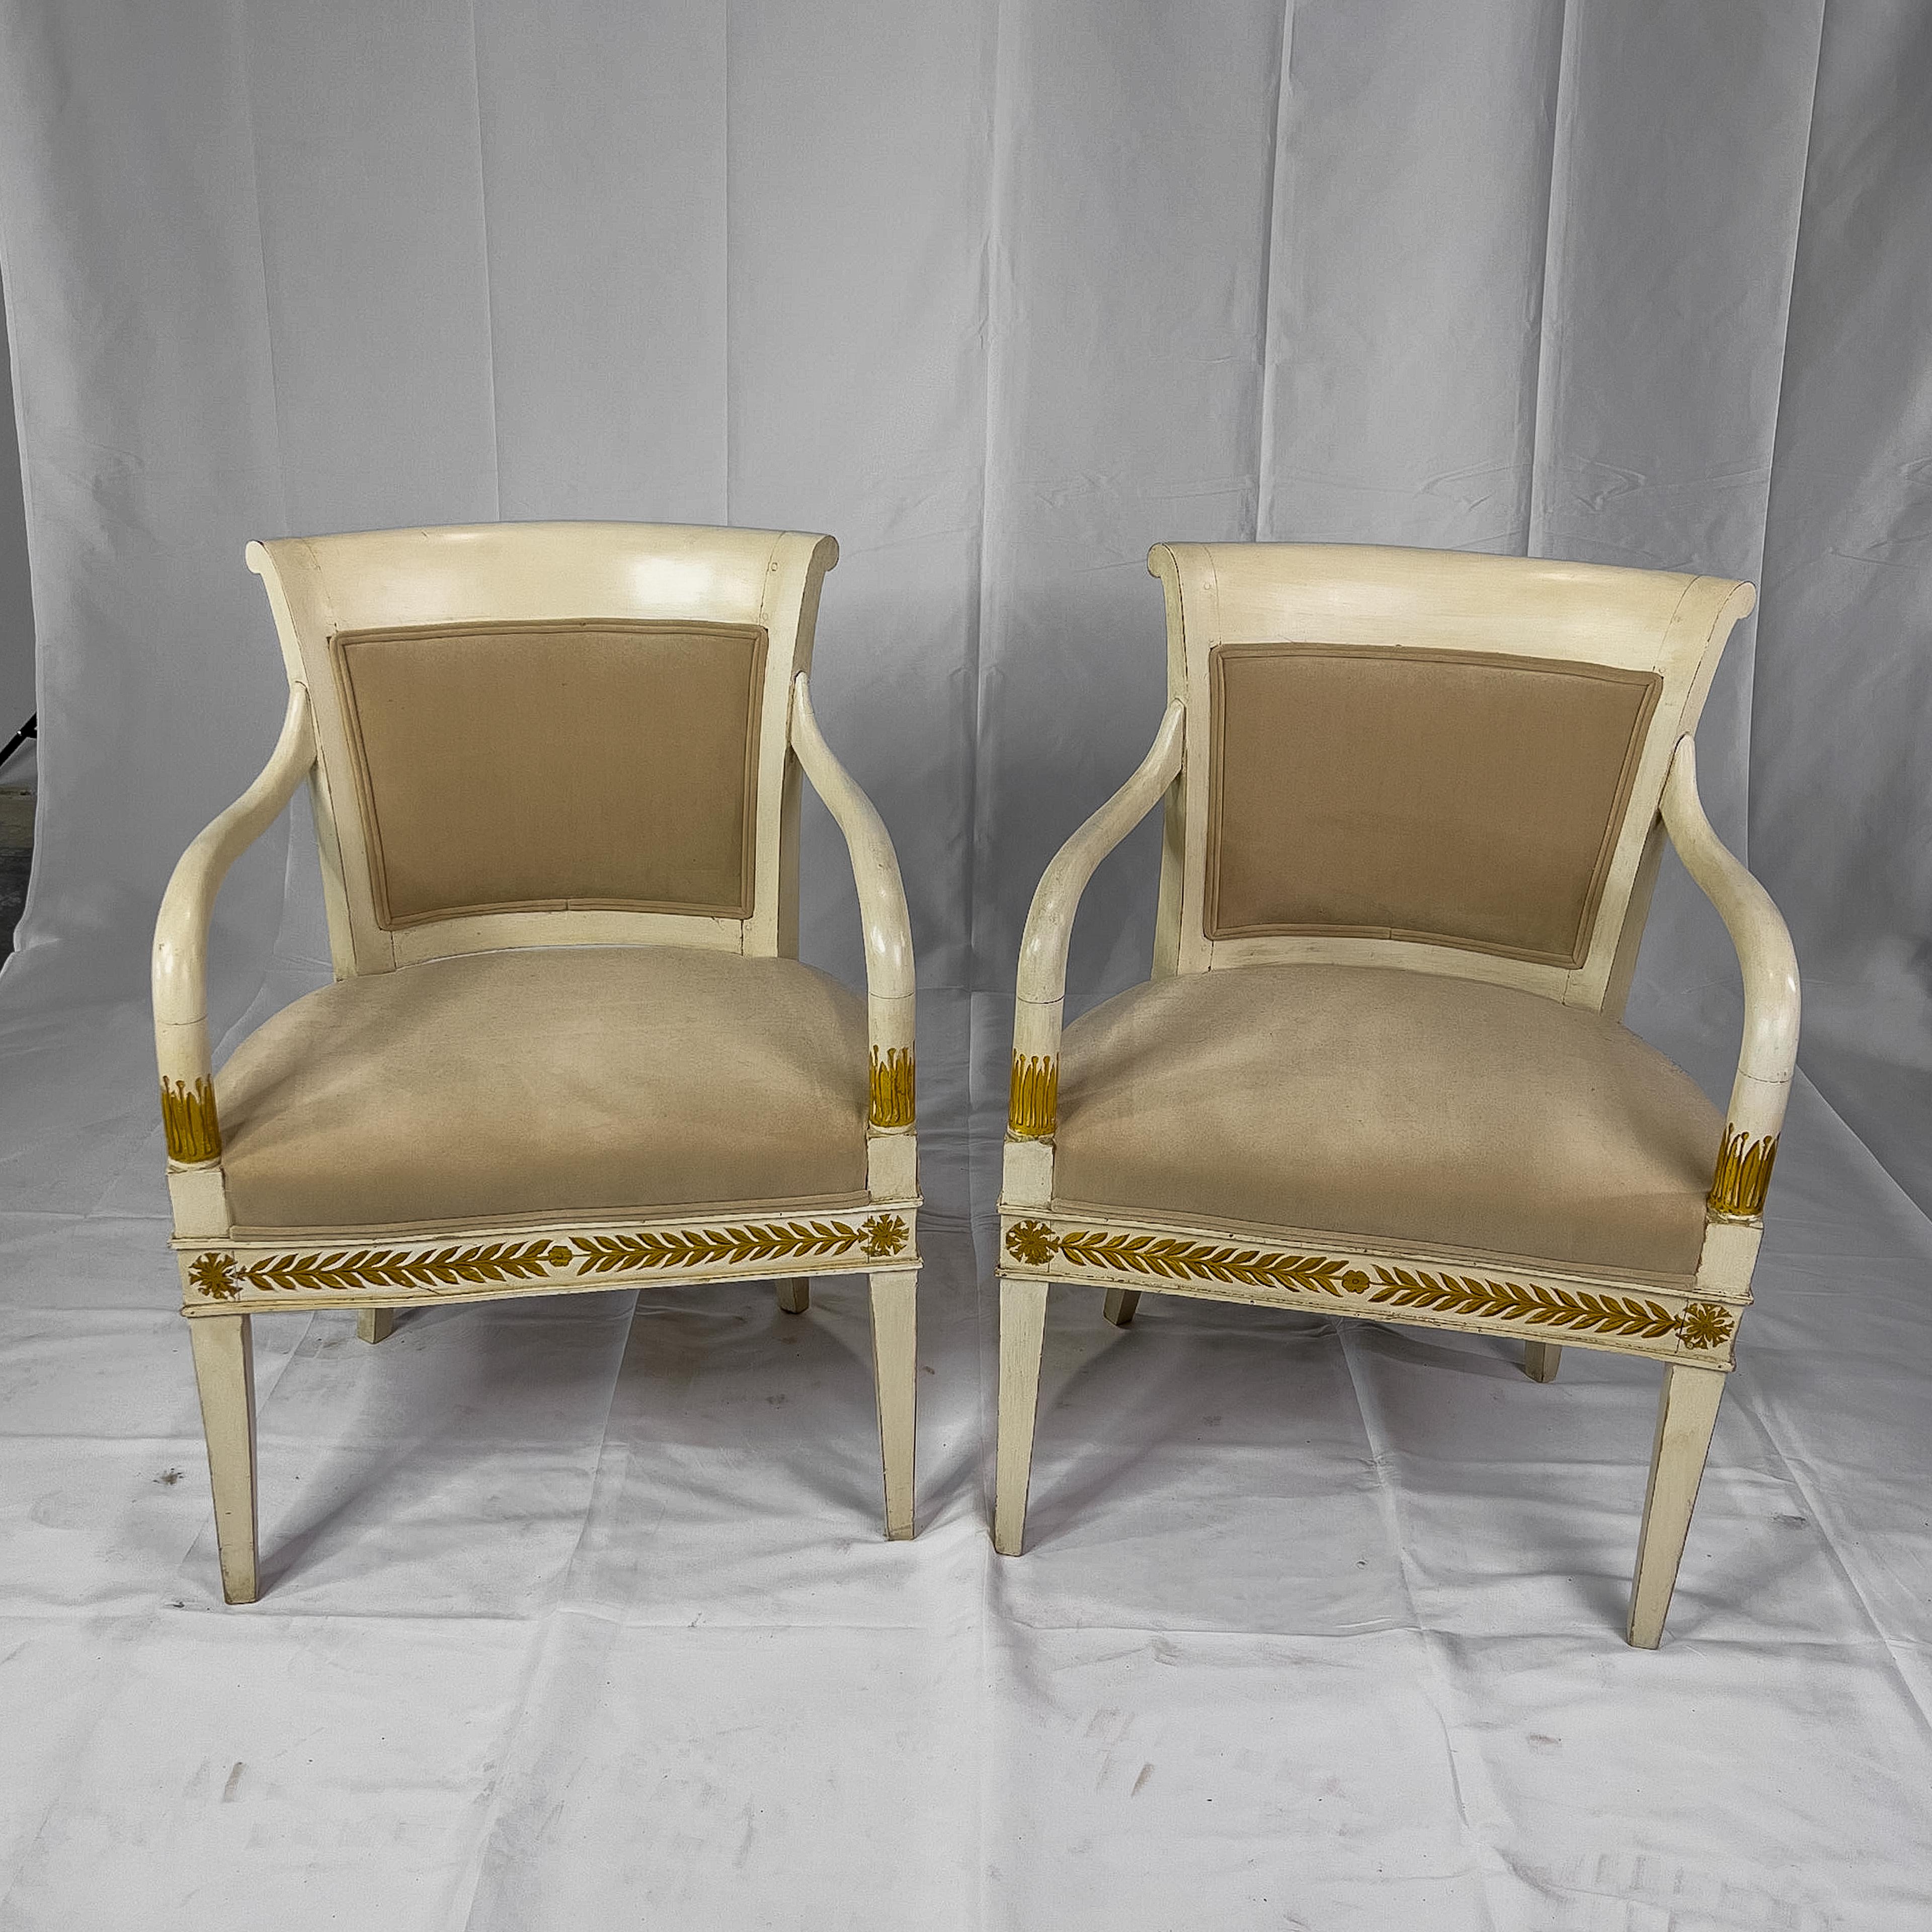 19th century painted Italian armchairs in Neoclassical style having gilt detail, a rounded back, upholstered seat and curvaceous arms.